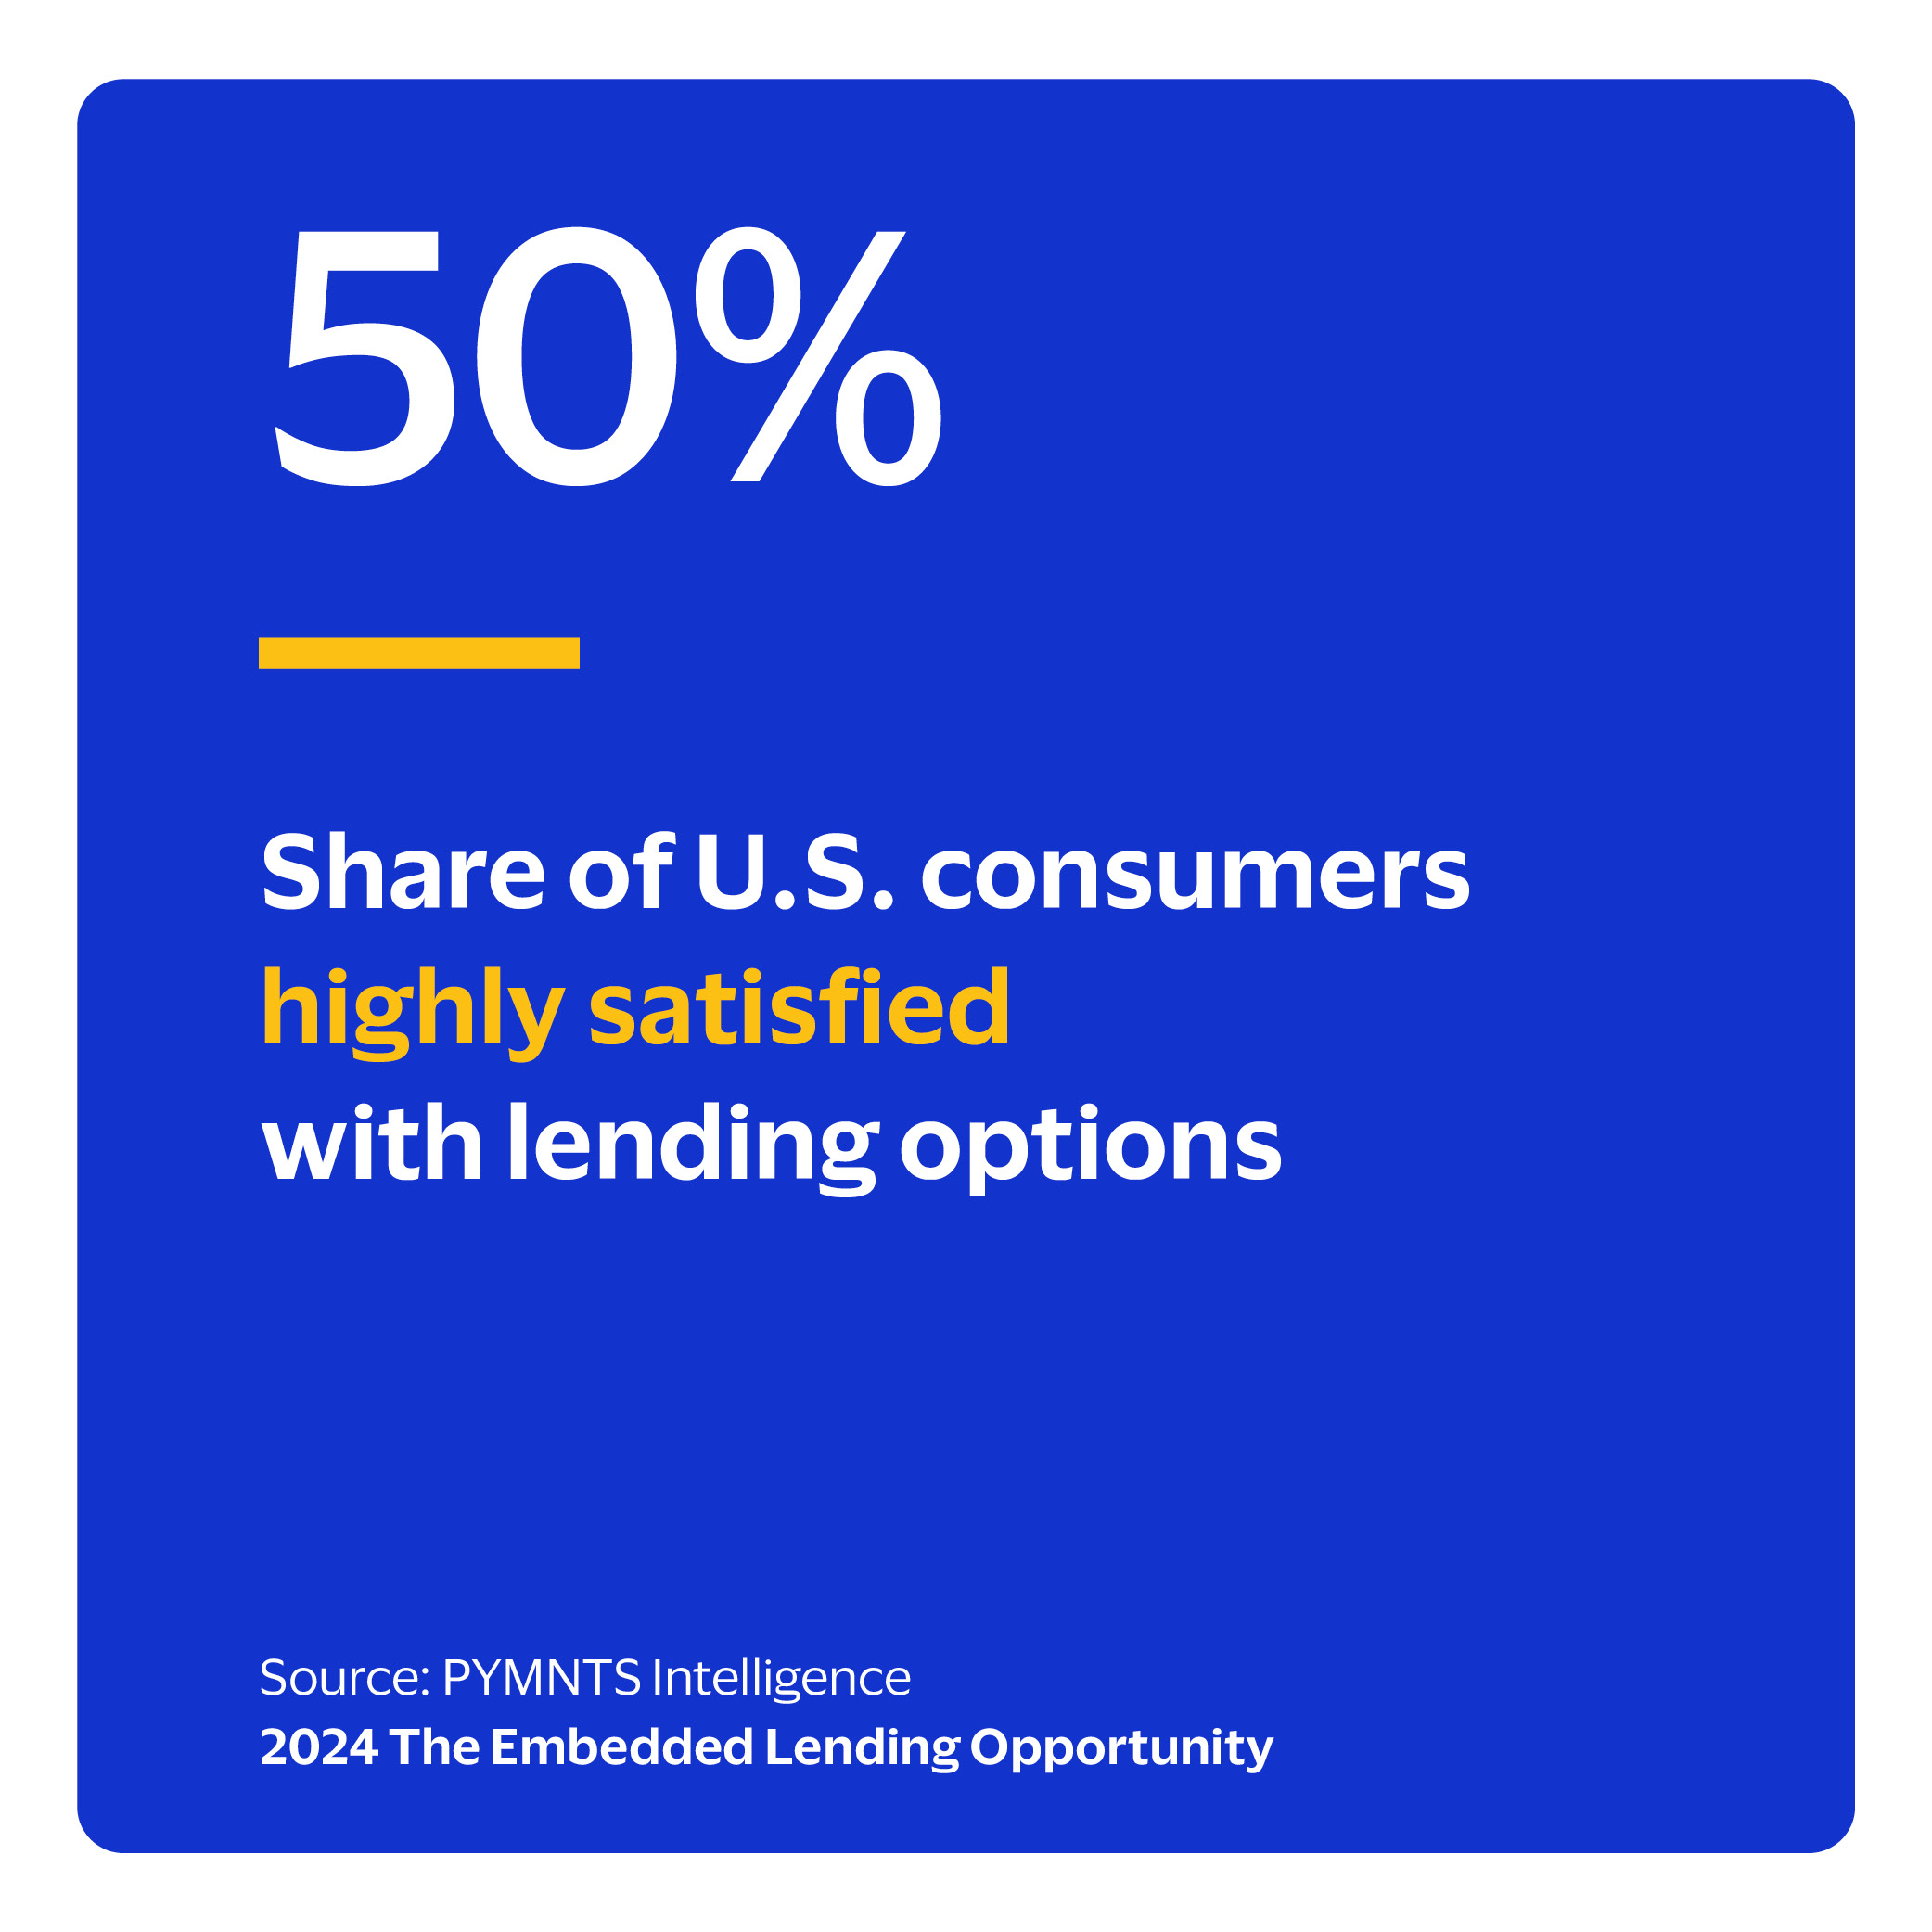  Share of U.S. consumers highly satisfied with lending options